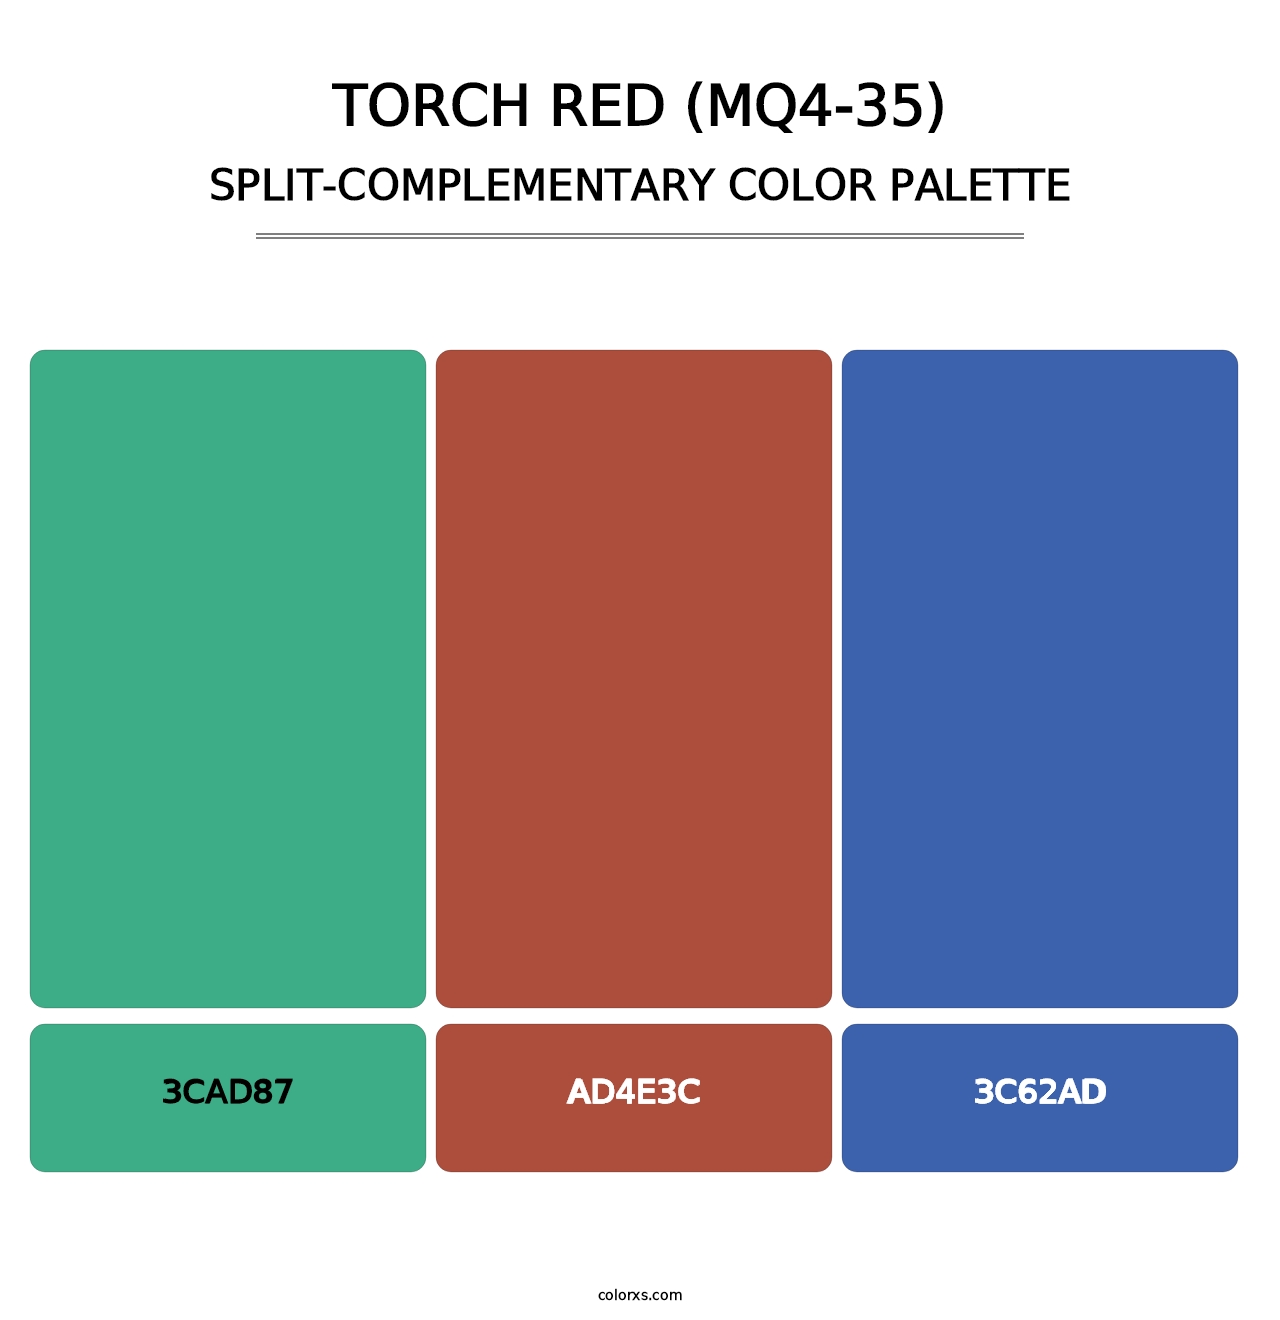 Torch Red (MQ4-35) - Split-Complementary Color Palette